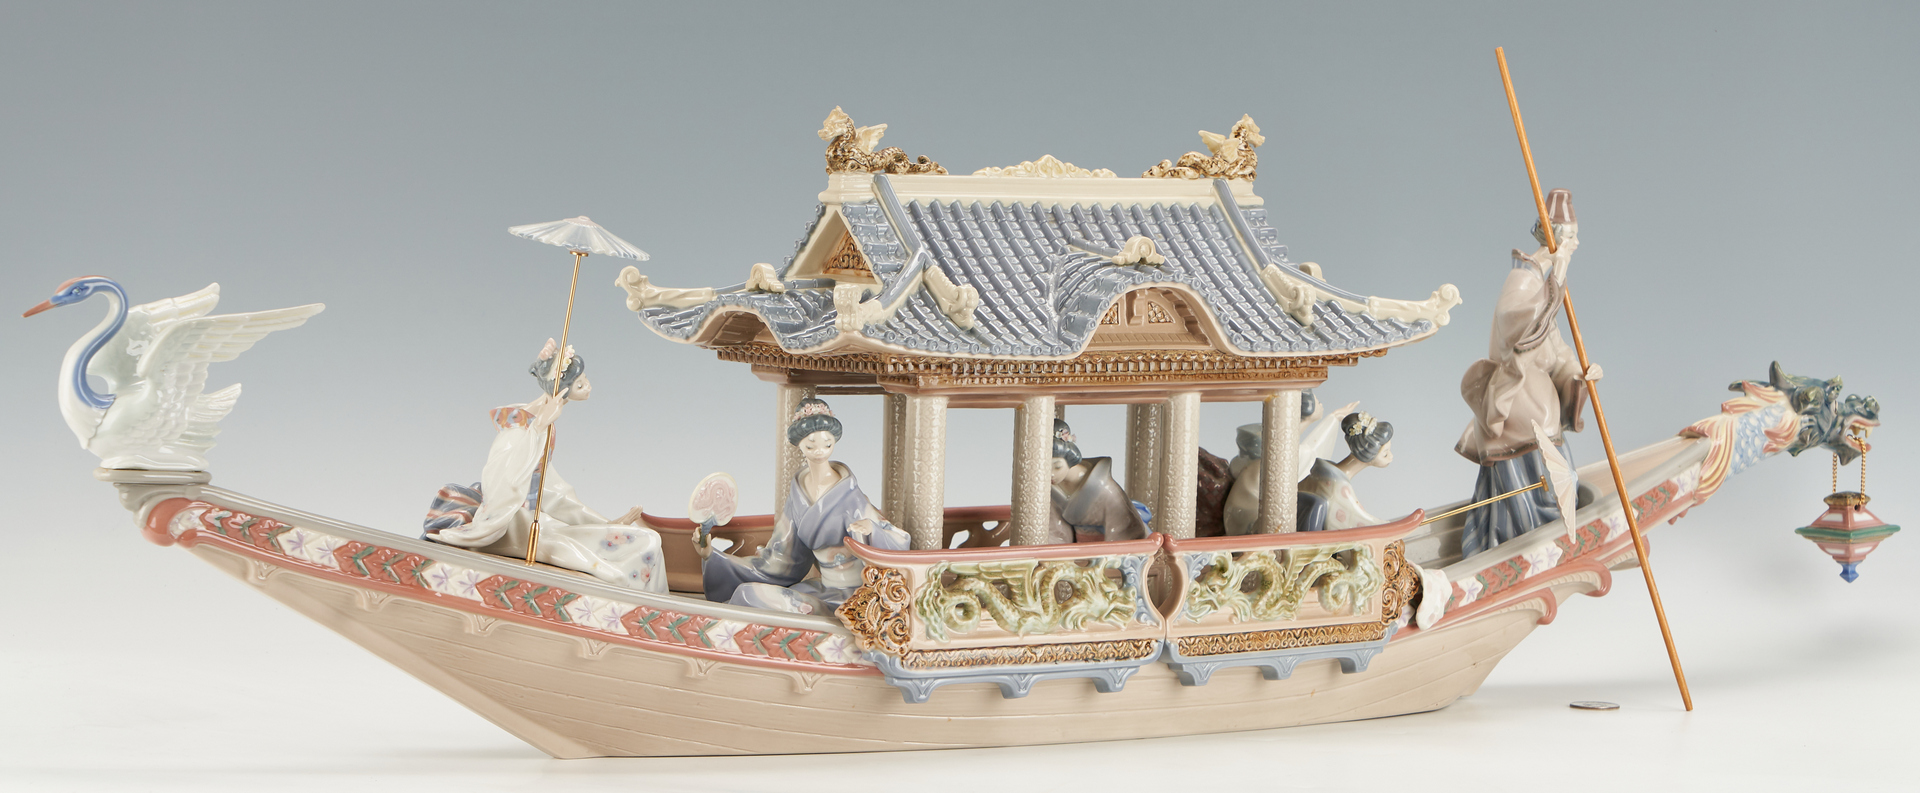 Lot 941: Limited Edition Lladro Porcelain Group, Kitakami Cruise